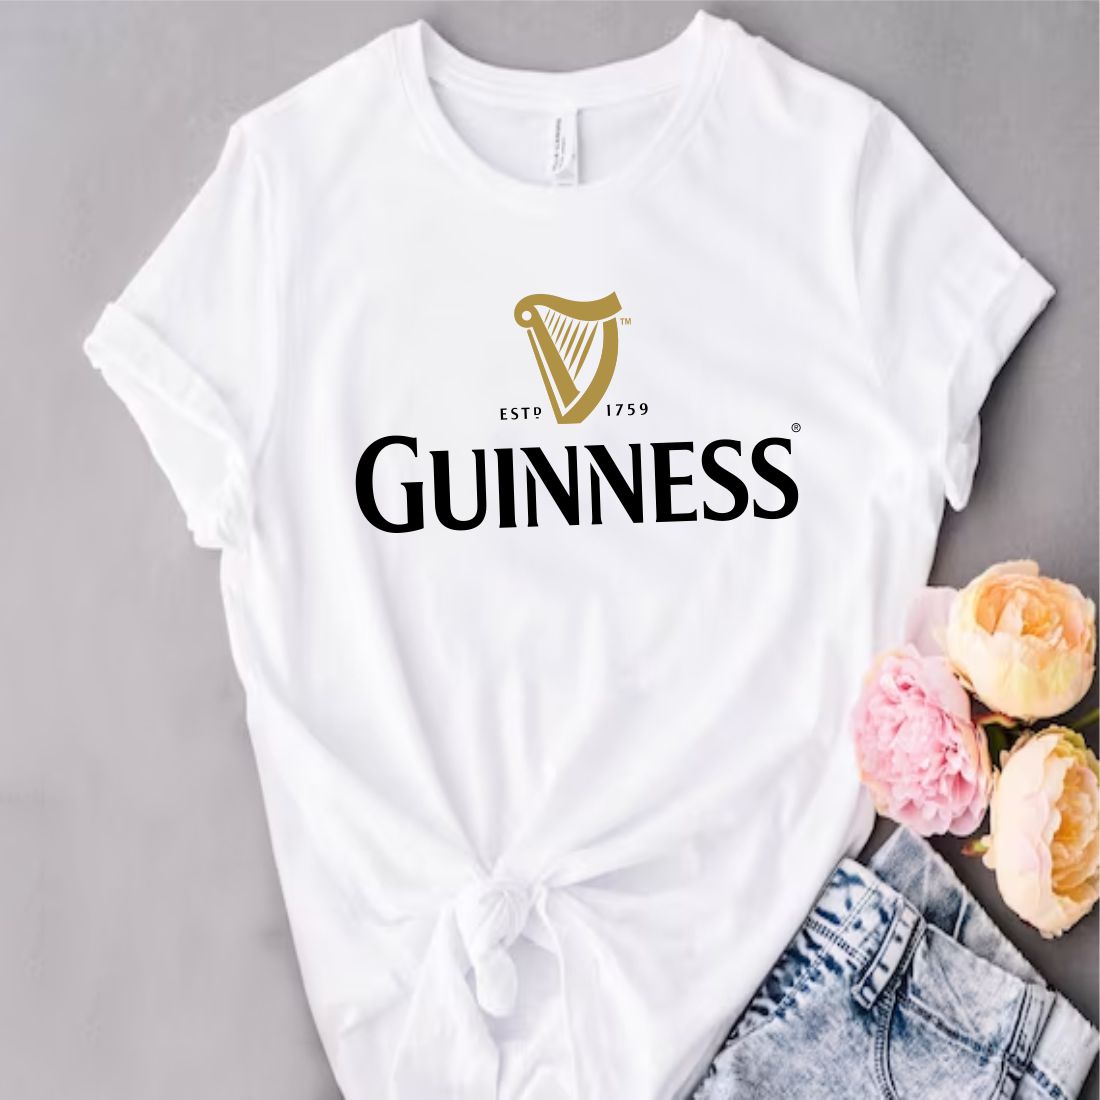 Guiness Svg, Guiness, Guiness Beer Svg, Guiness Png, Beer Png, Guines Svg, Instant Download Vector Cut file Cricut, Silhouette, Pdf Png, Dxf, Decal preview image.